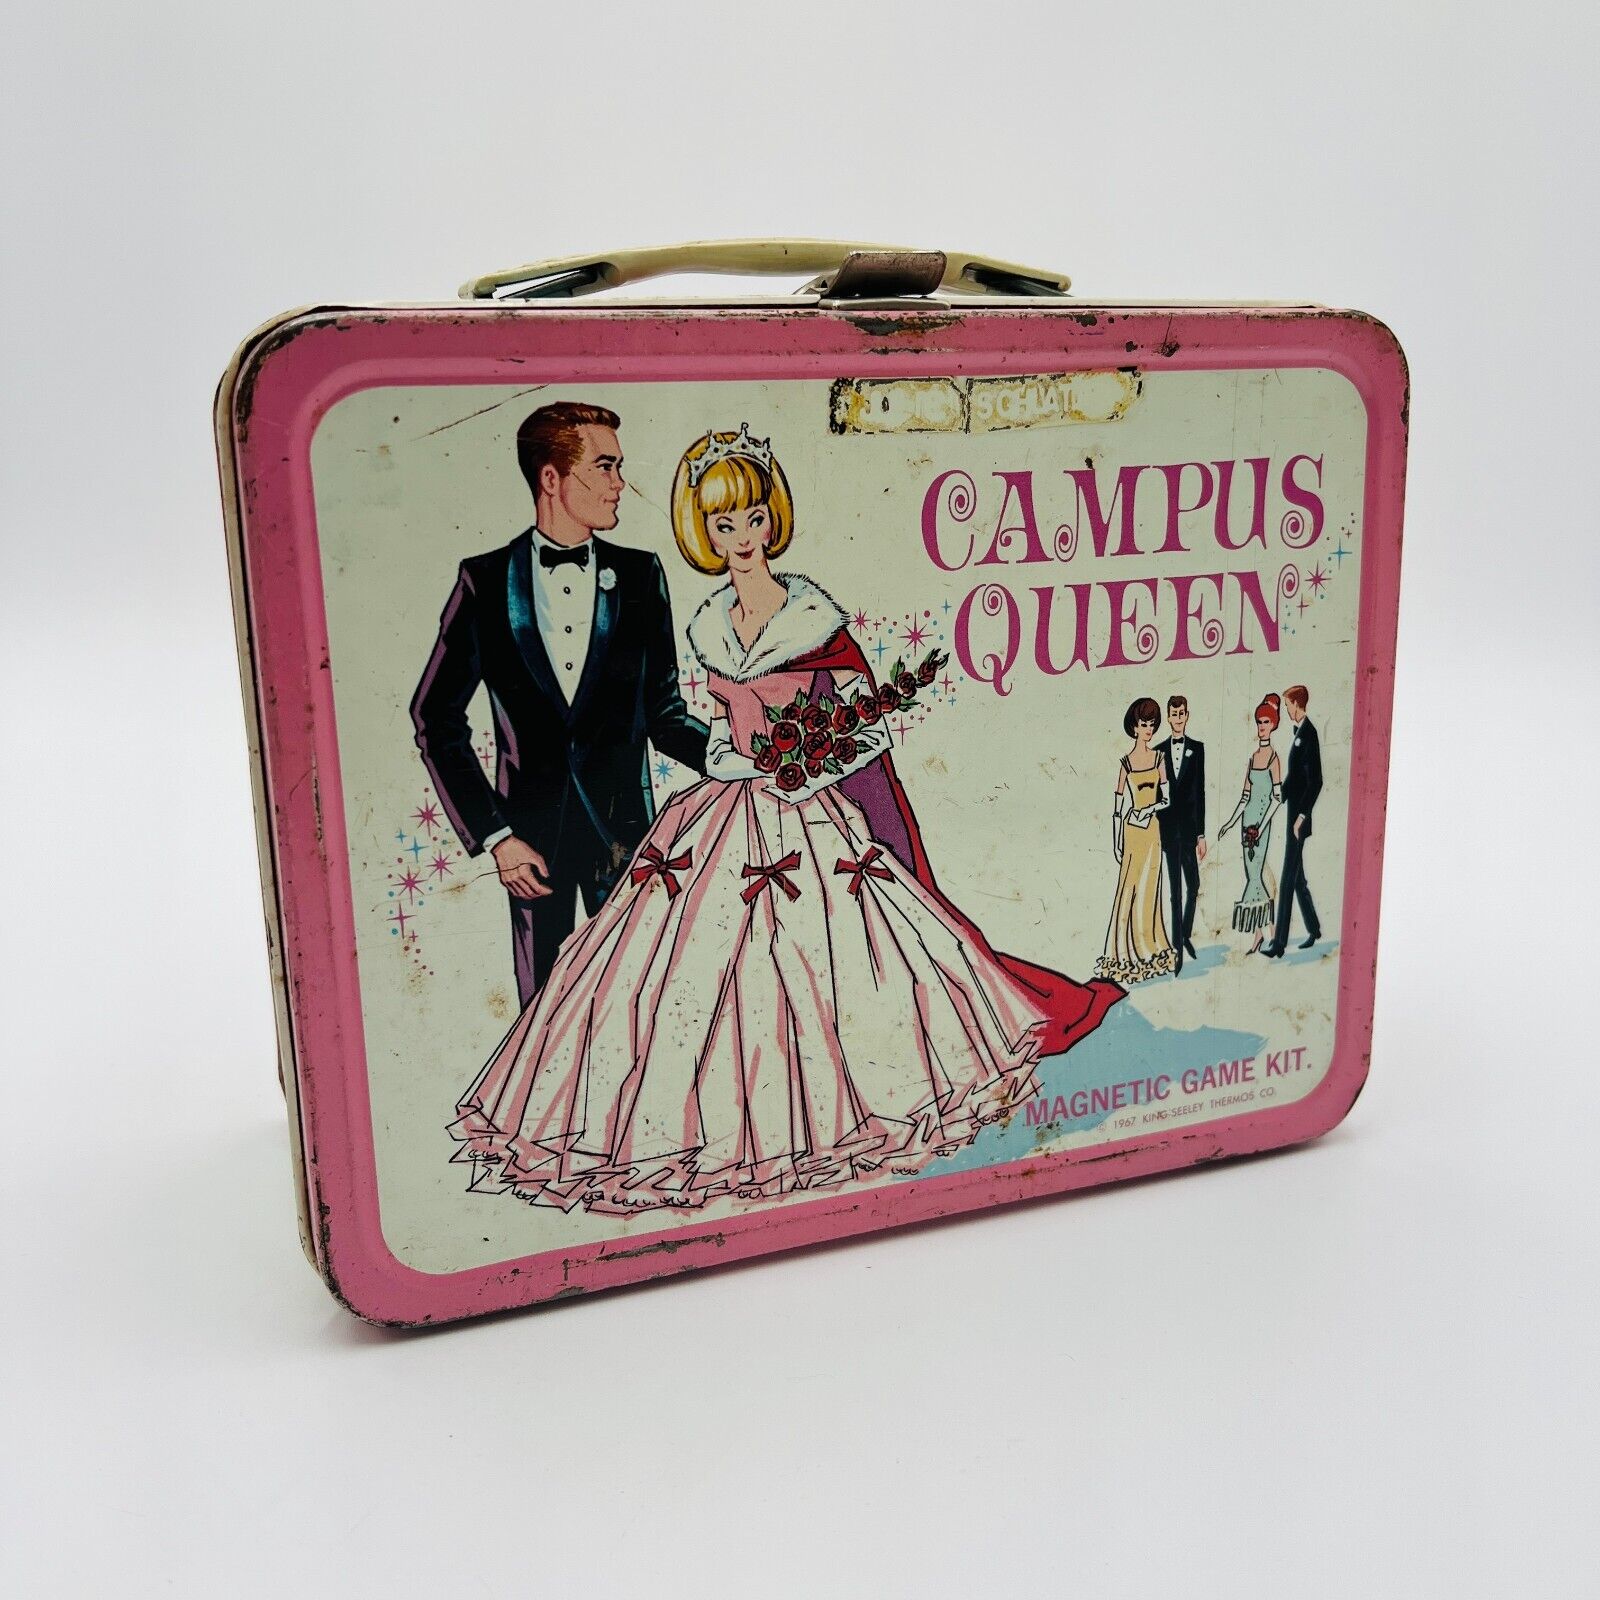 Vintage Campus Queen Metal Lunchbox King Seeley Thermos 1967 - Used Condition